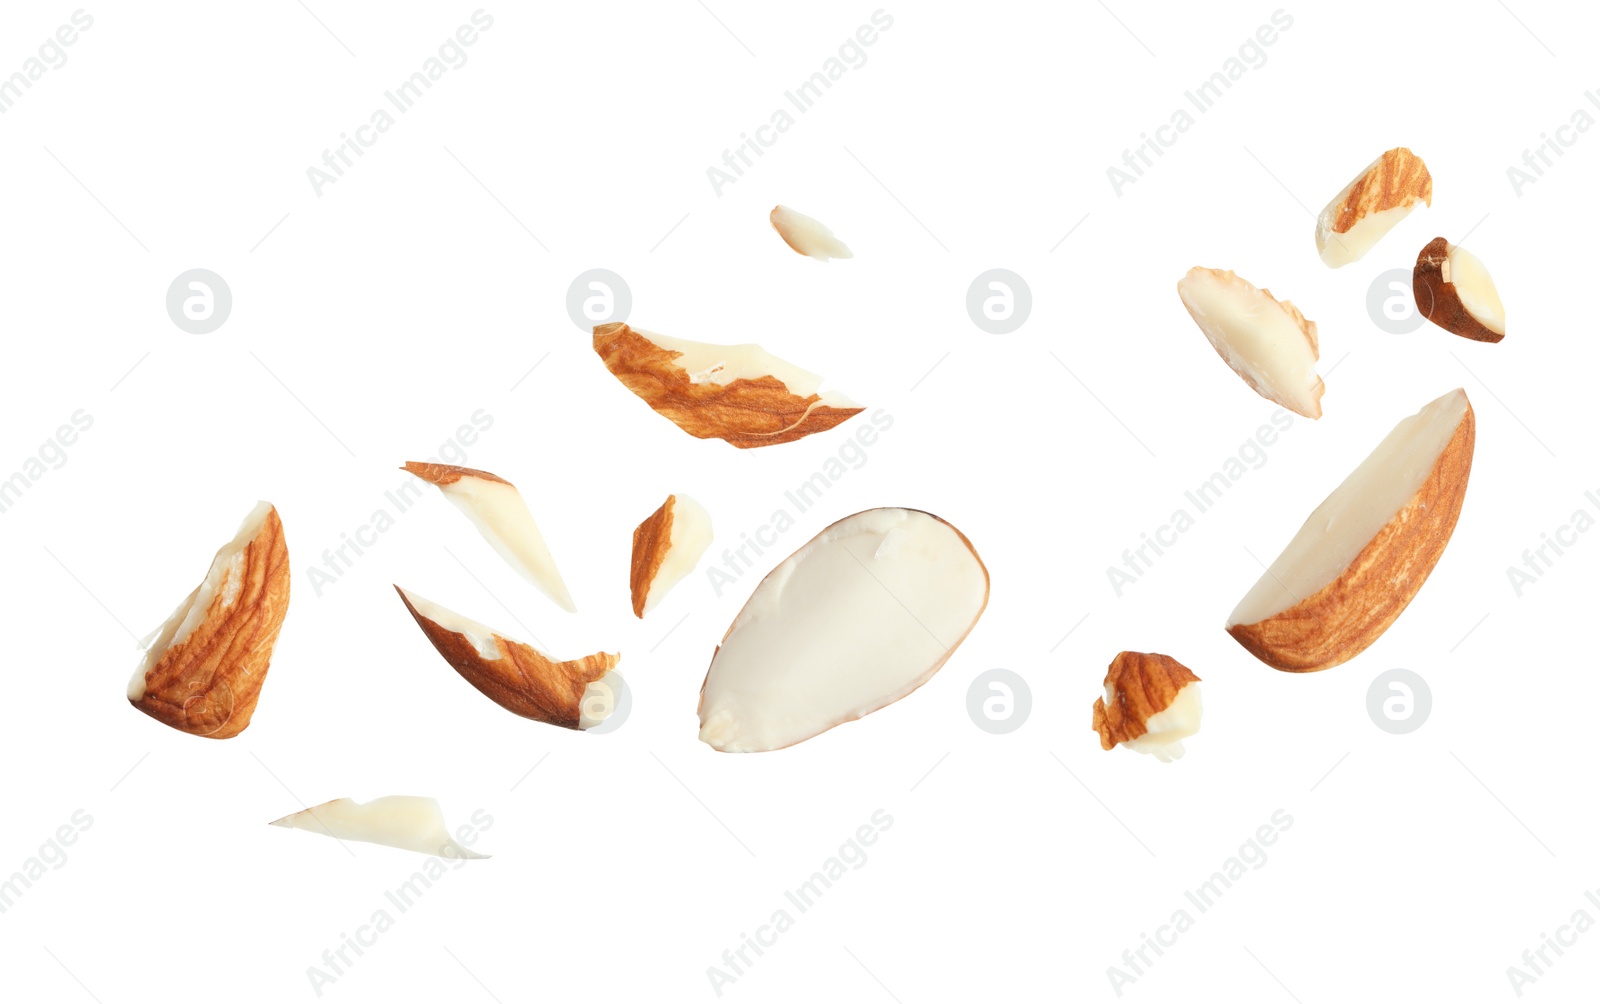 Photo of Pieces of tasty almonds on white background